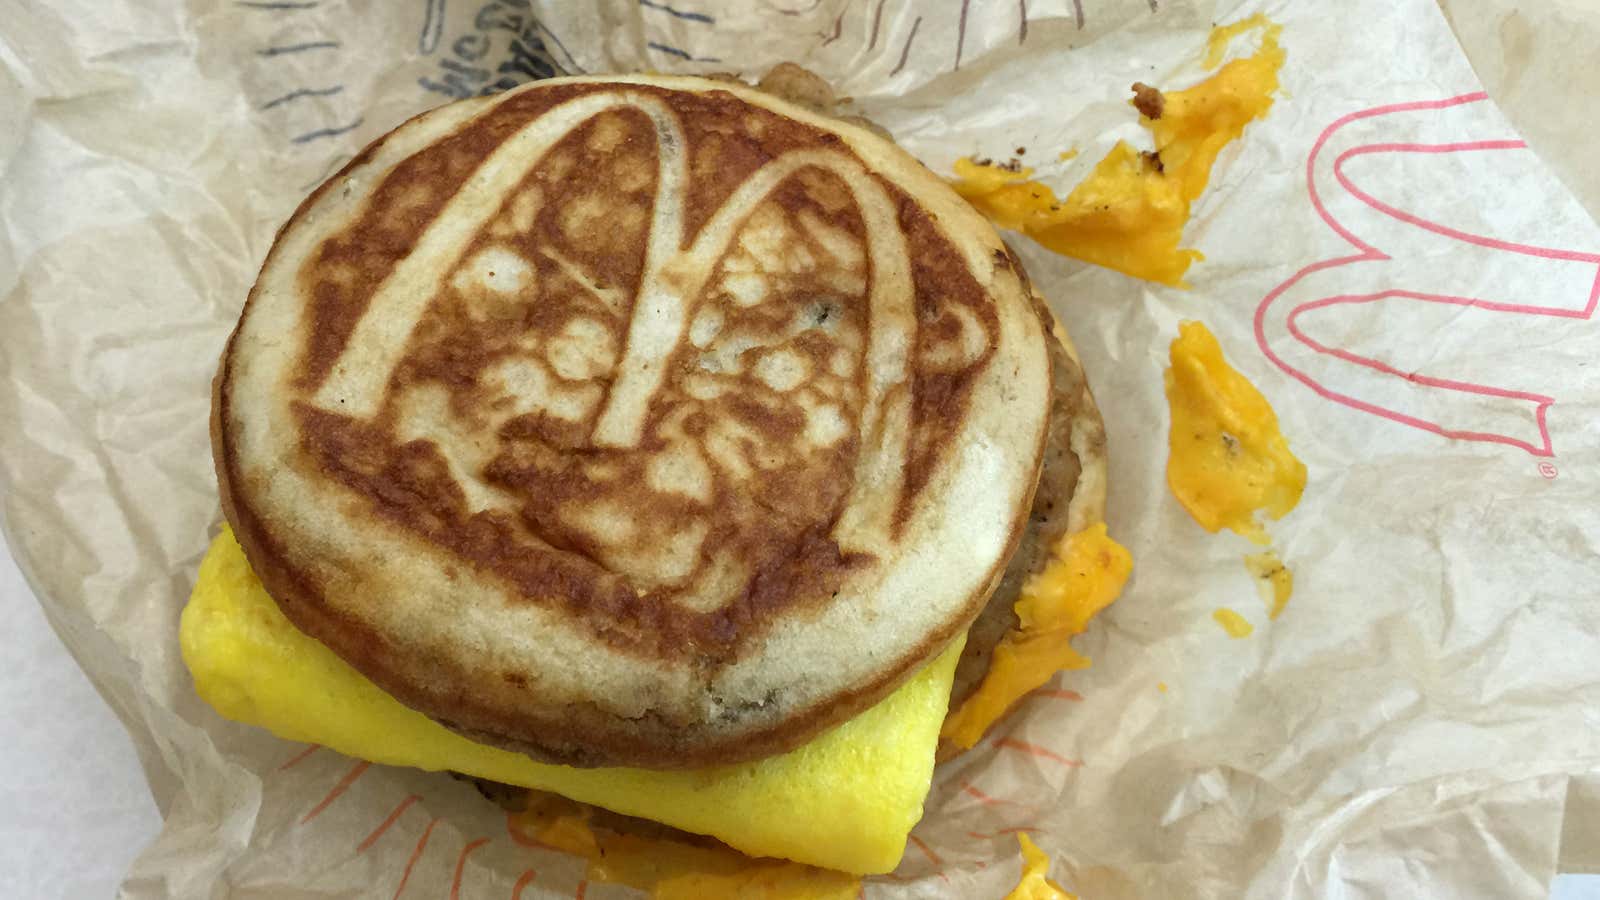 People are ordering Egg McMuffins as side items.